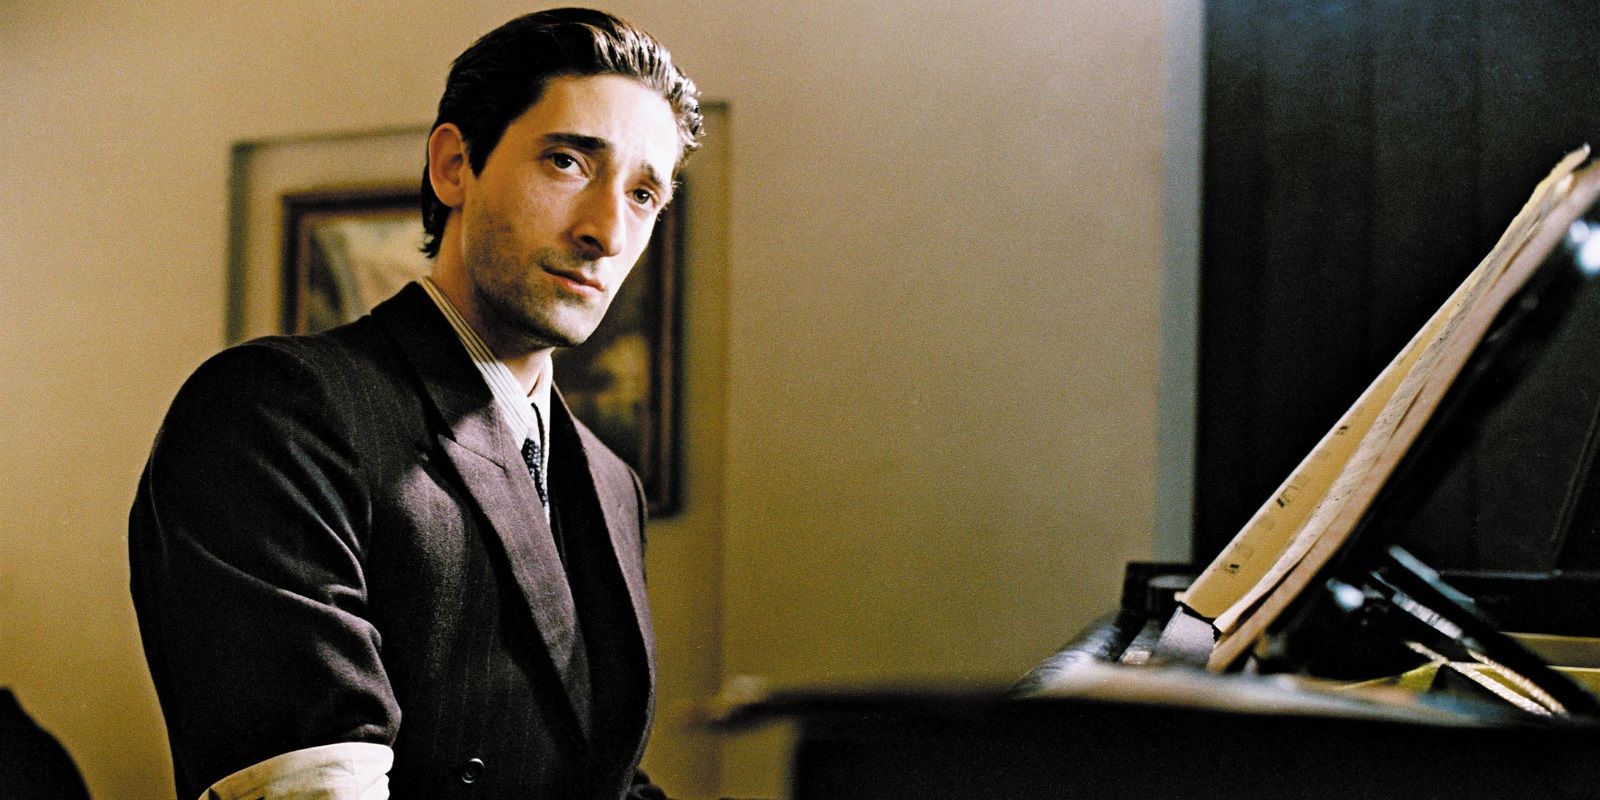 Adrien Brody playing the piano in The Pianist.